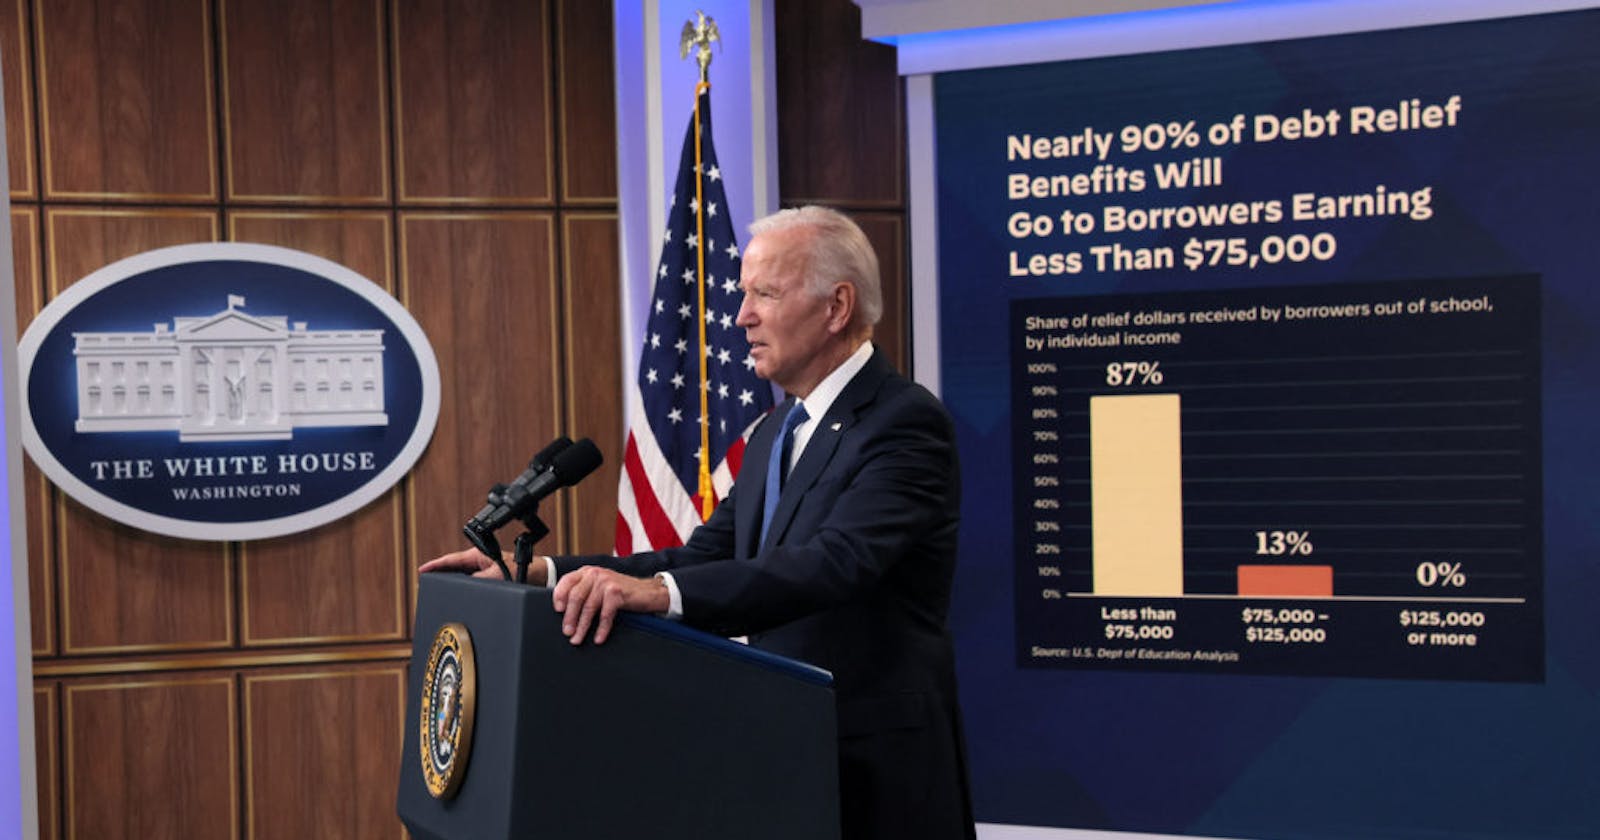 Biden’s biggest and most contentious domestic policy programs